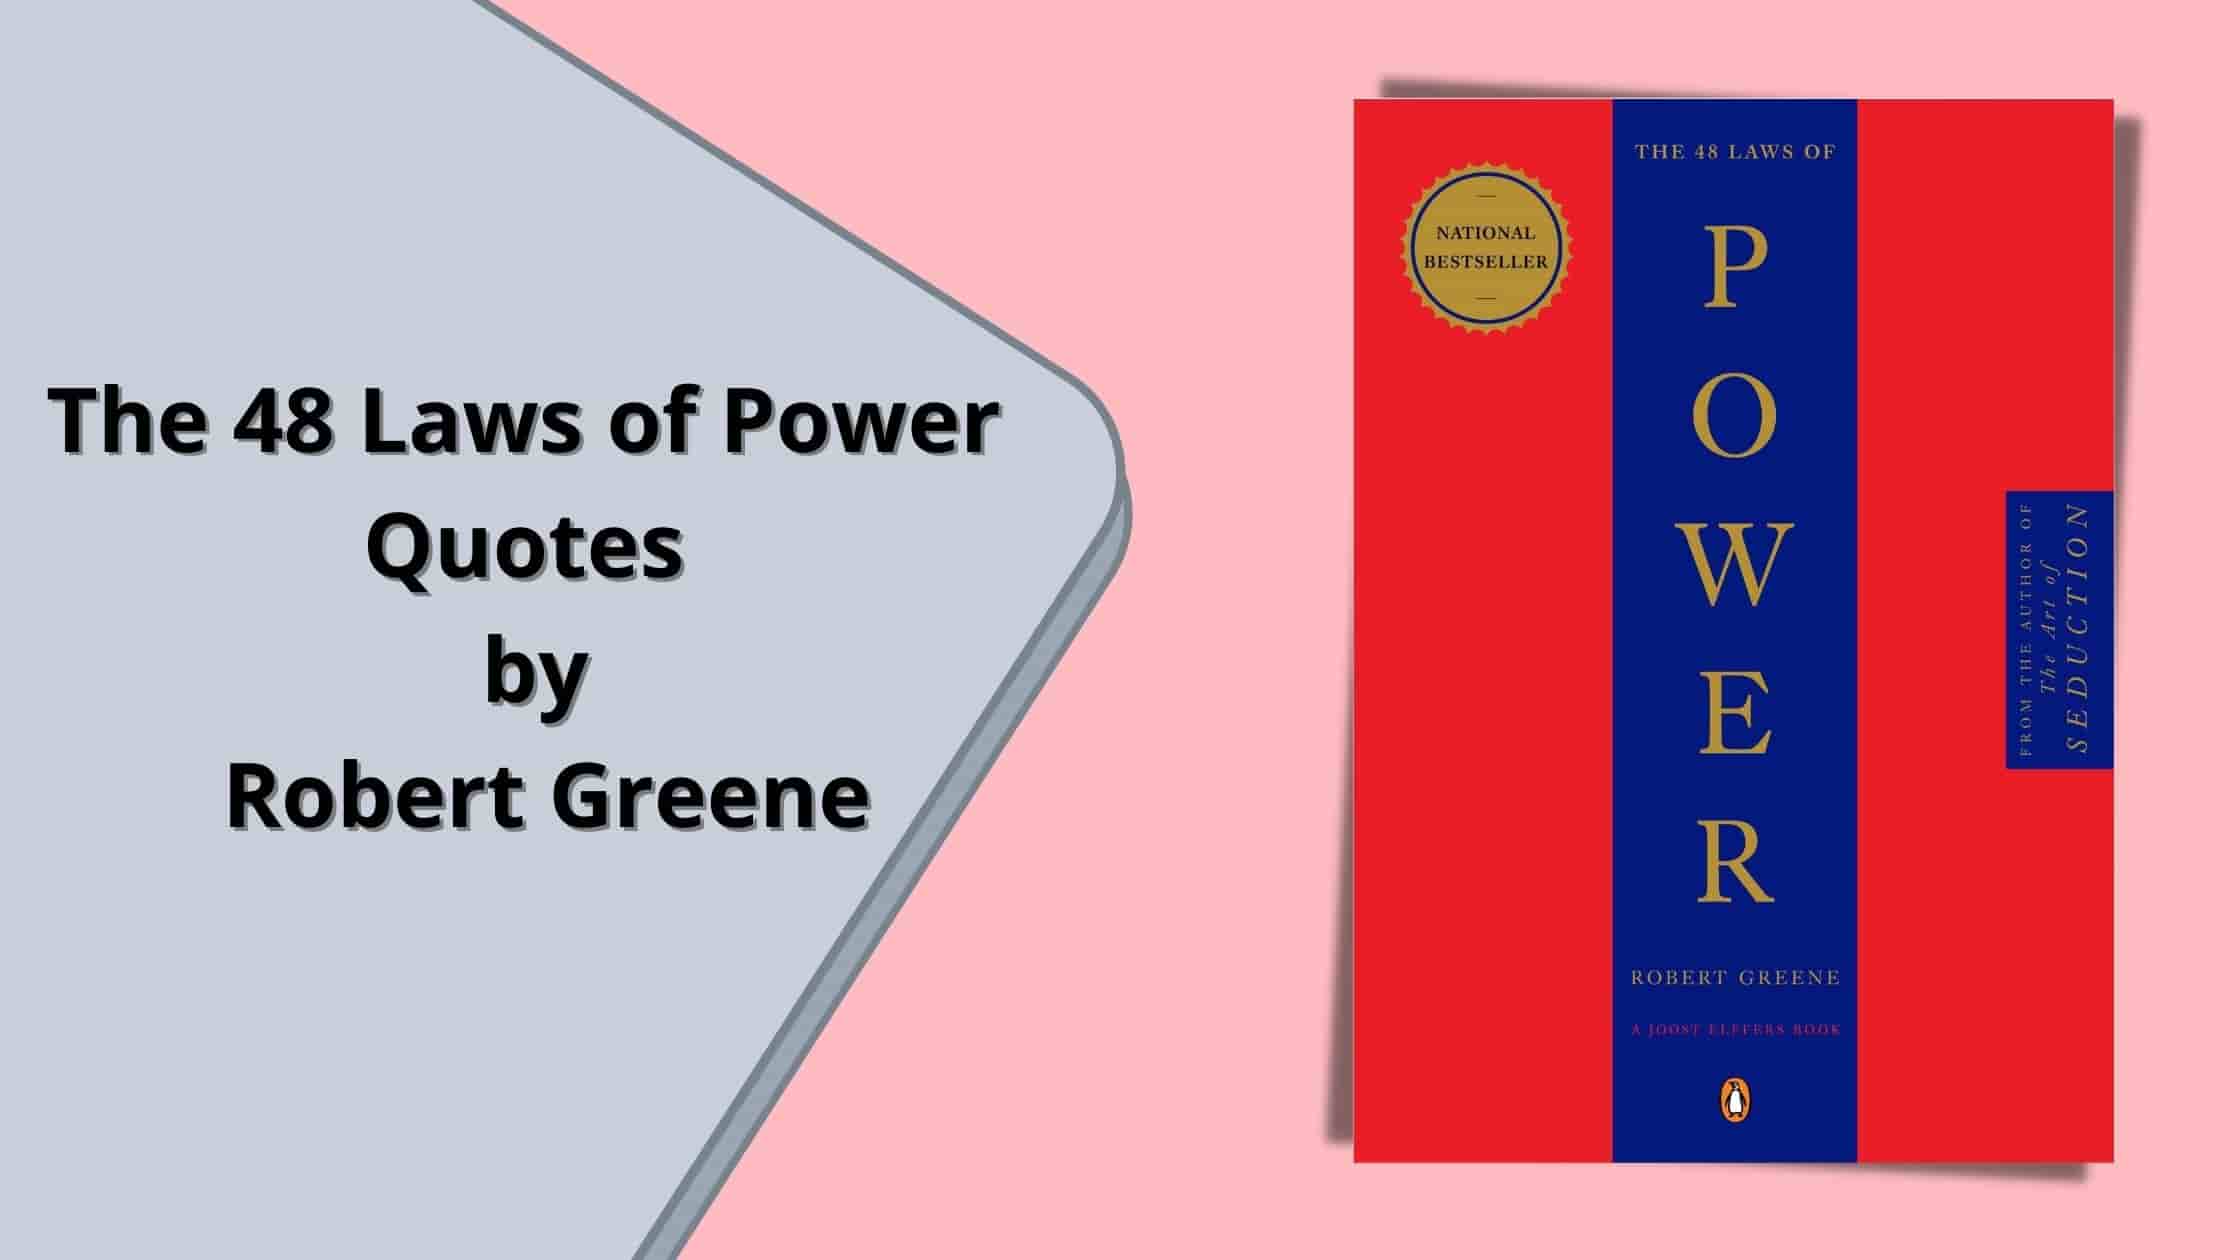 The 48 Laws of Power Quotes by Robert Greene | The SoftBook.